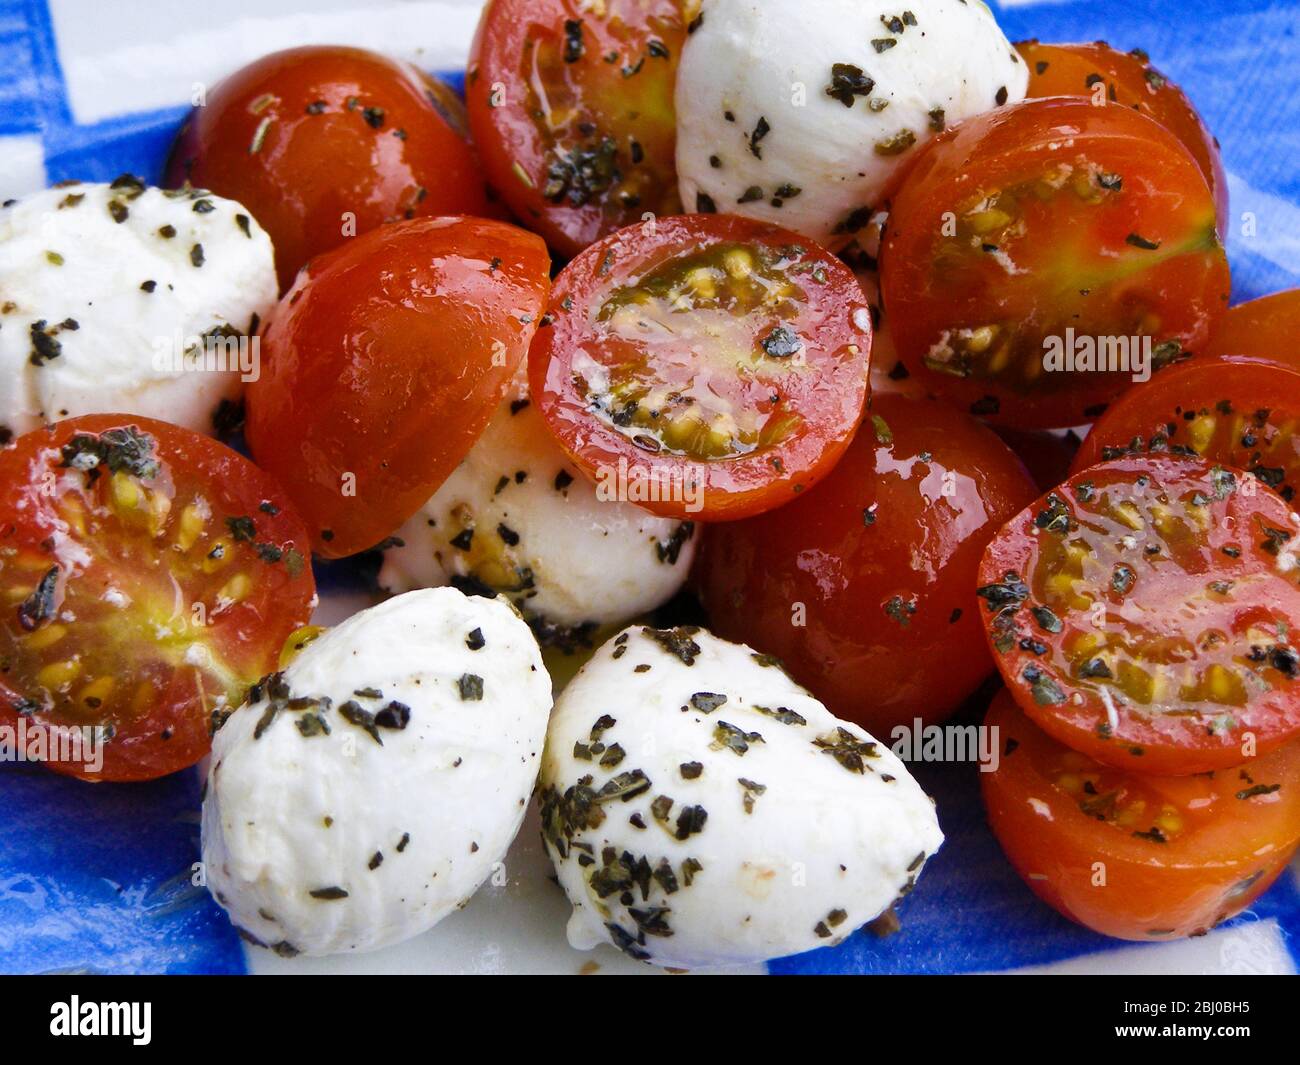 Salad of mozzarella balls with cherry tomatoes in oil, vinegar and herb dressing. - Stock Photo